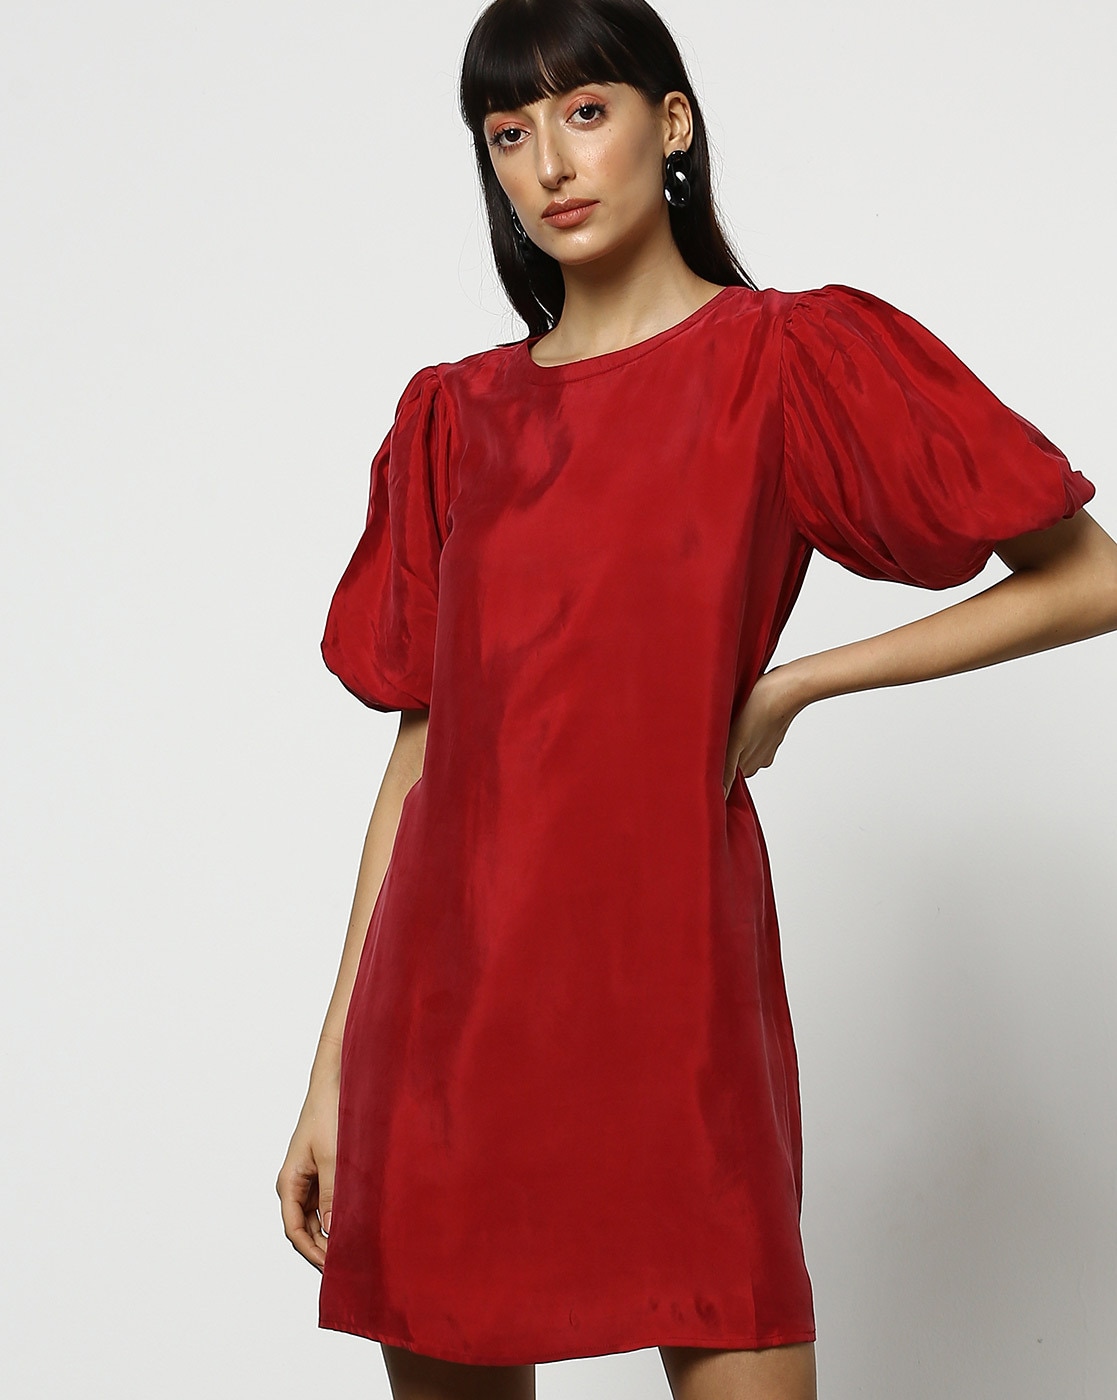 Buy Red Dresses for Women by Outryt ...